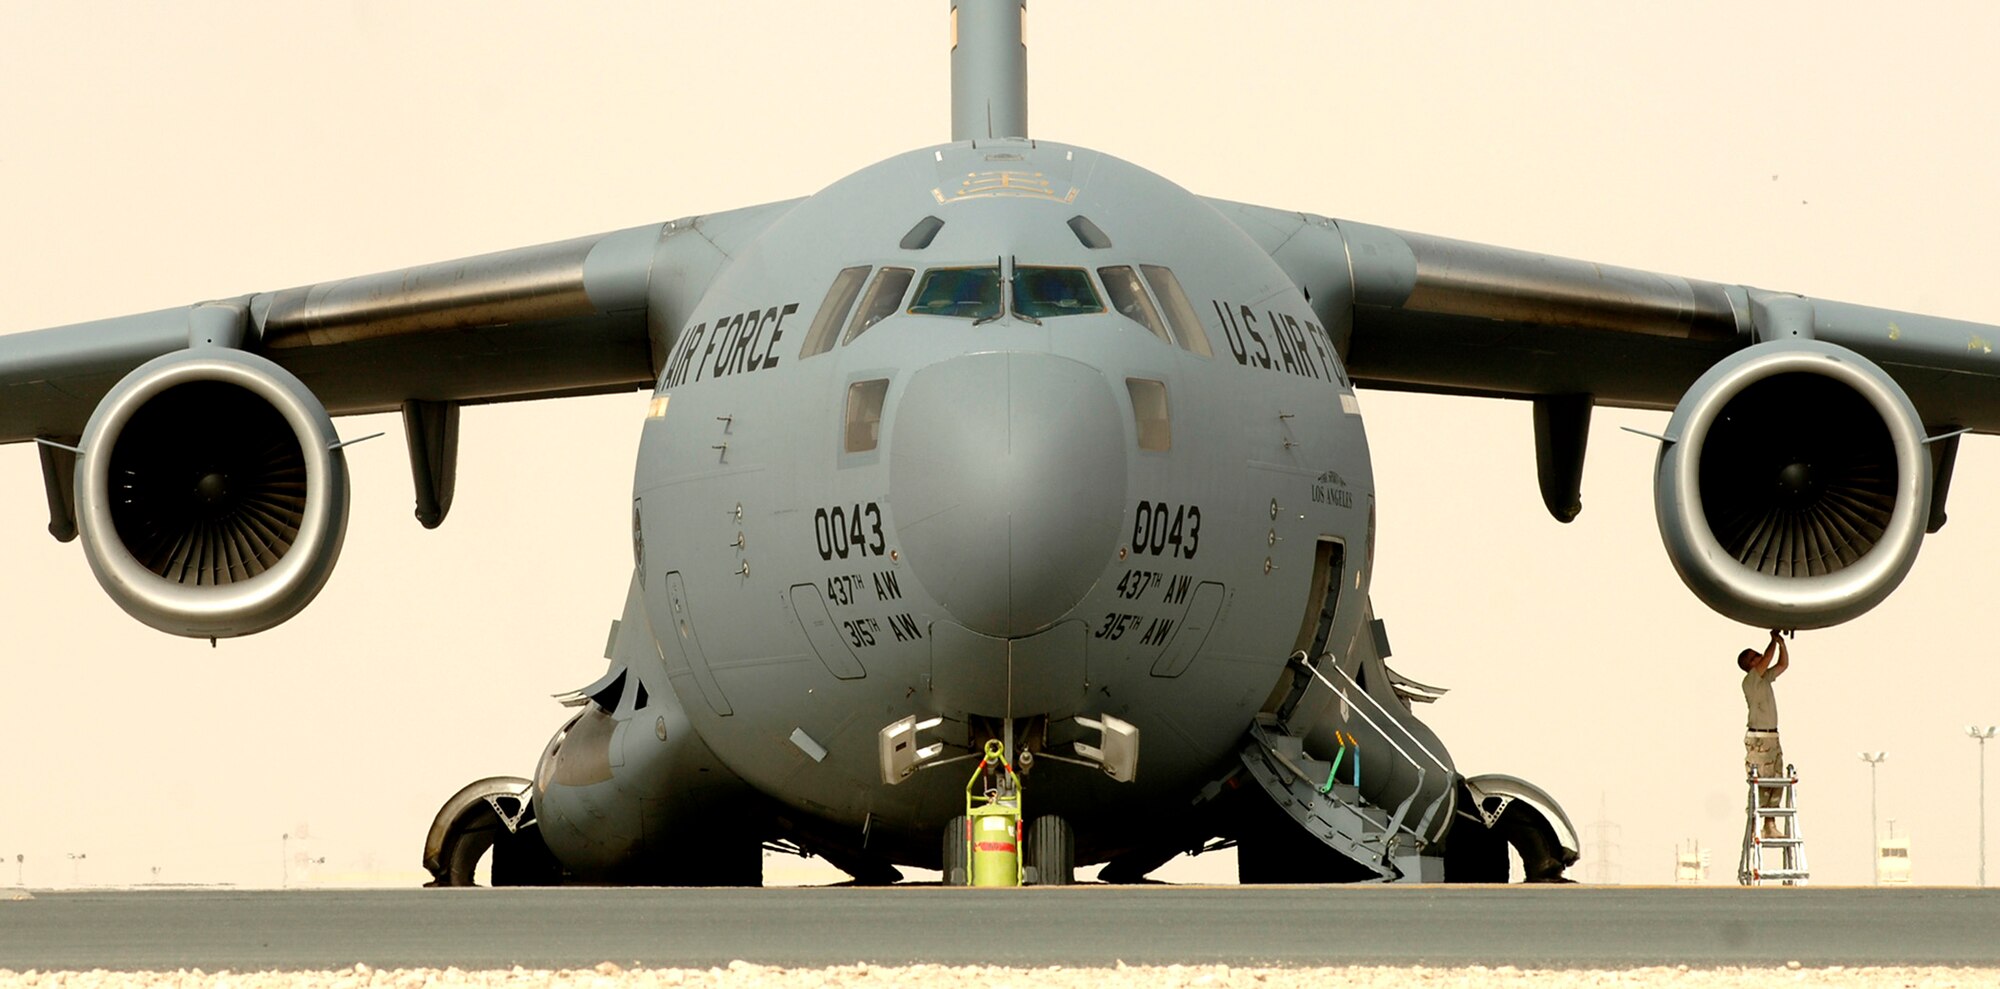 A C-17 Globemaster maintainer prepares his aircraft for take off in support of operations in Iraq.  C-17's provid intra-theater heavy airlift support.  (U.S. Air Force photo/Tech. Sgt. Cecilio M. Ricardo Jr.)